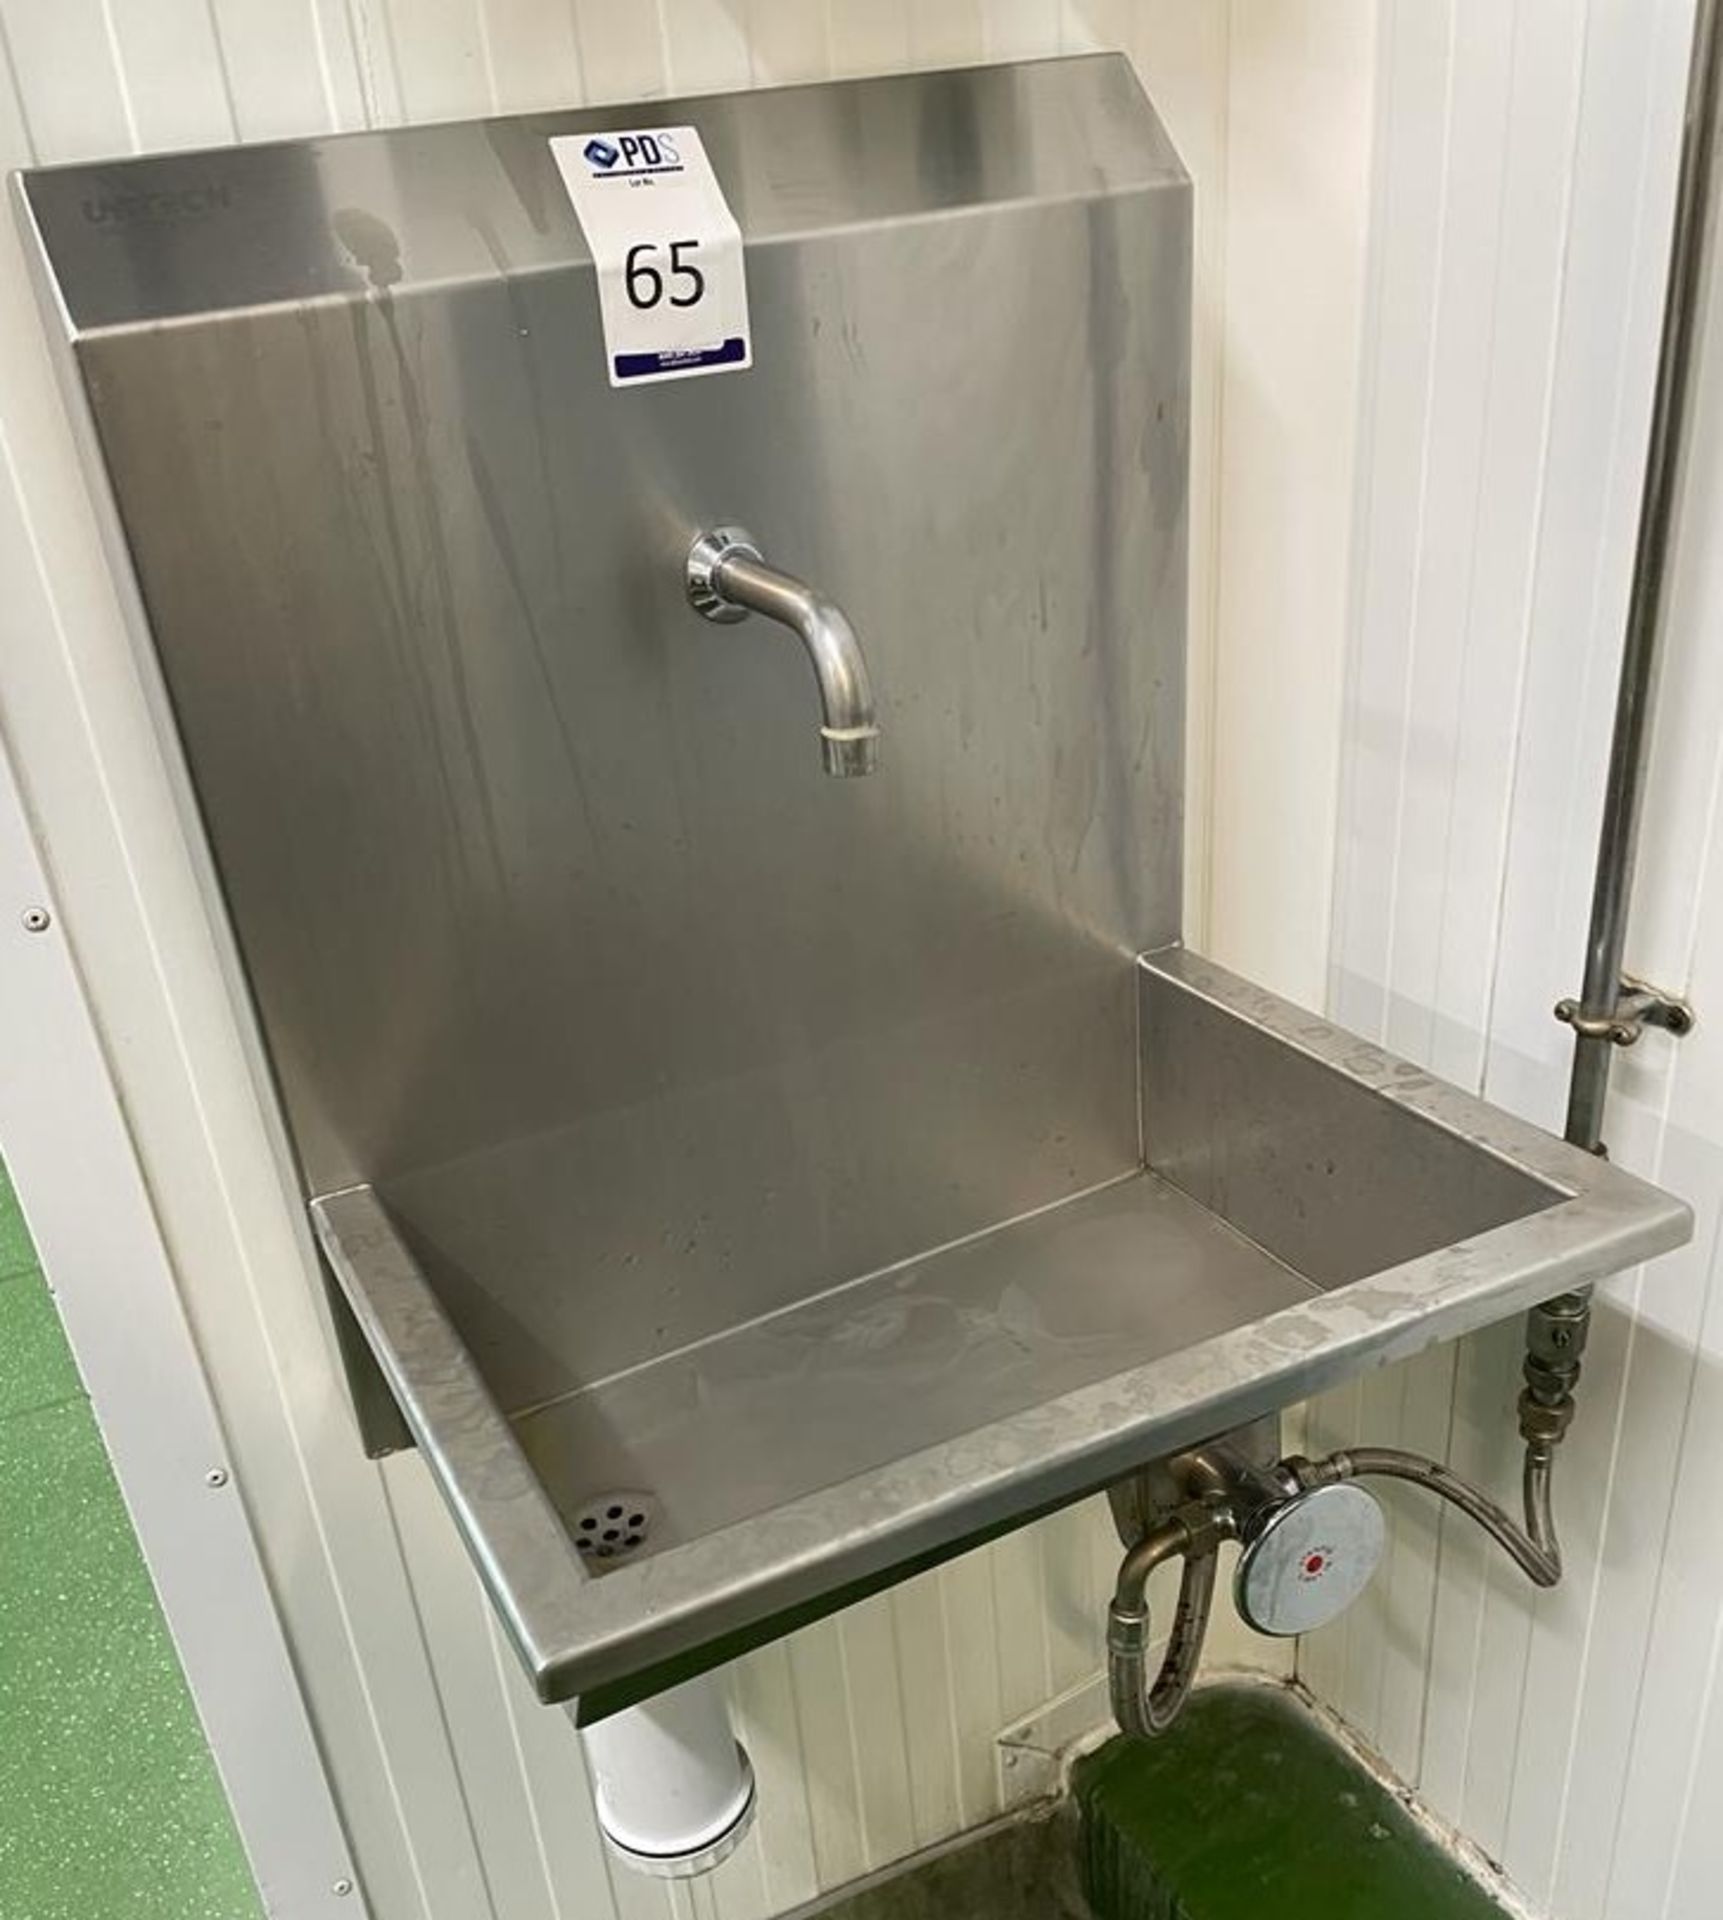 Unitec Knee Operated Handwash Sink (Location: NW London. Please Refer to General Notes)